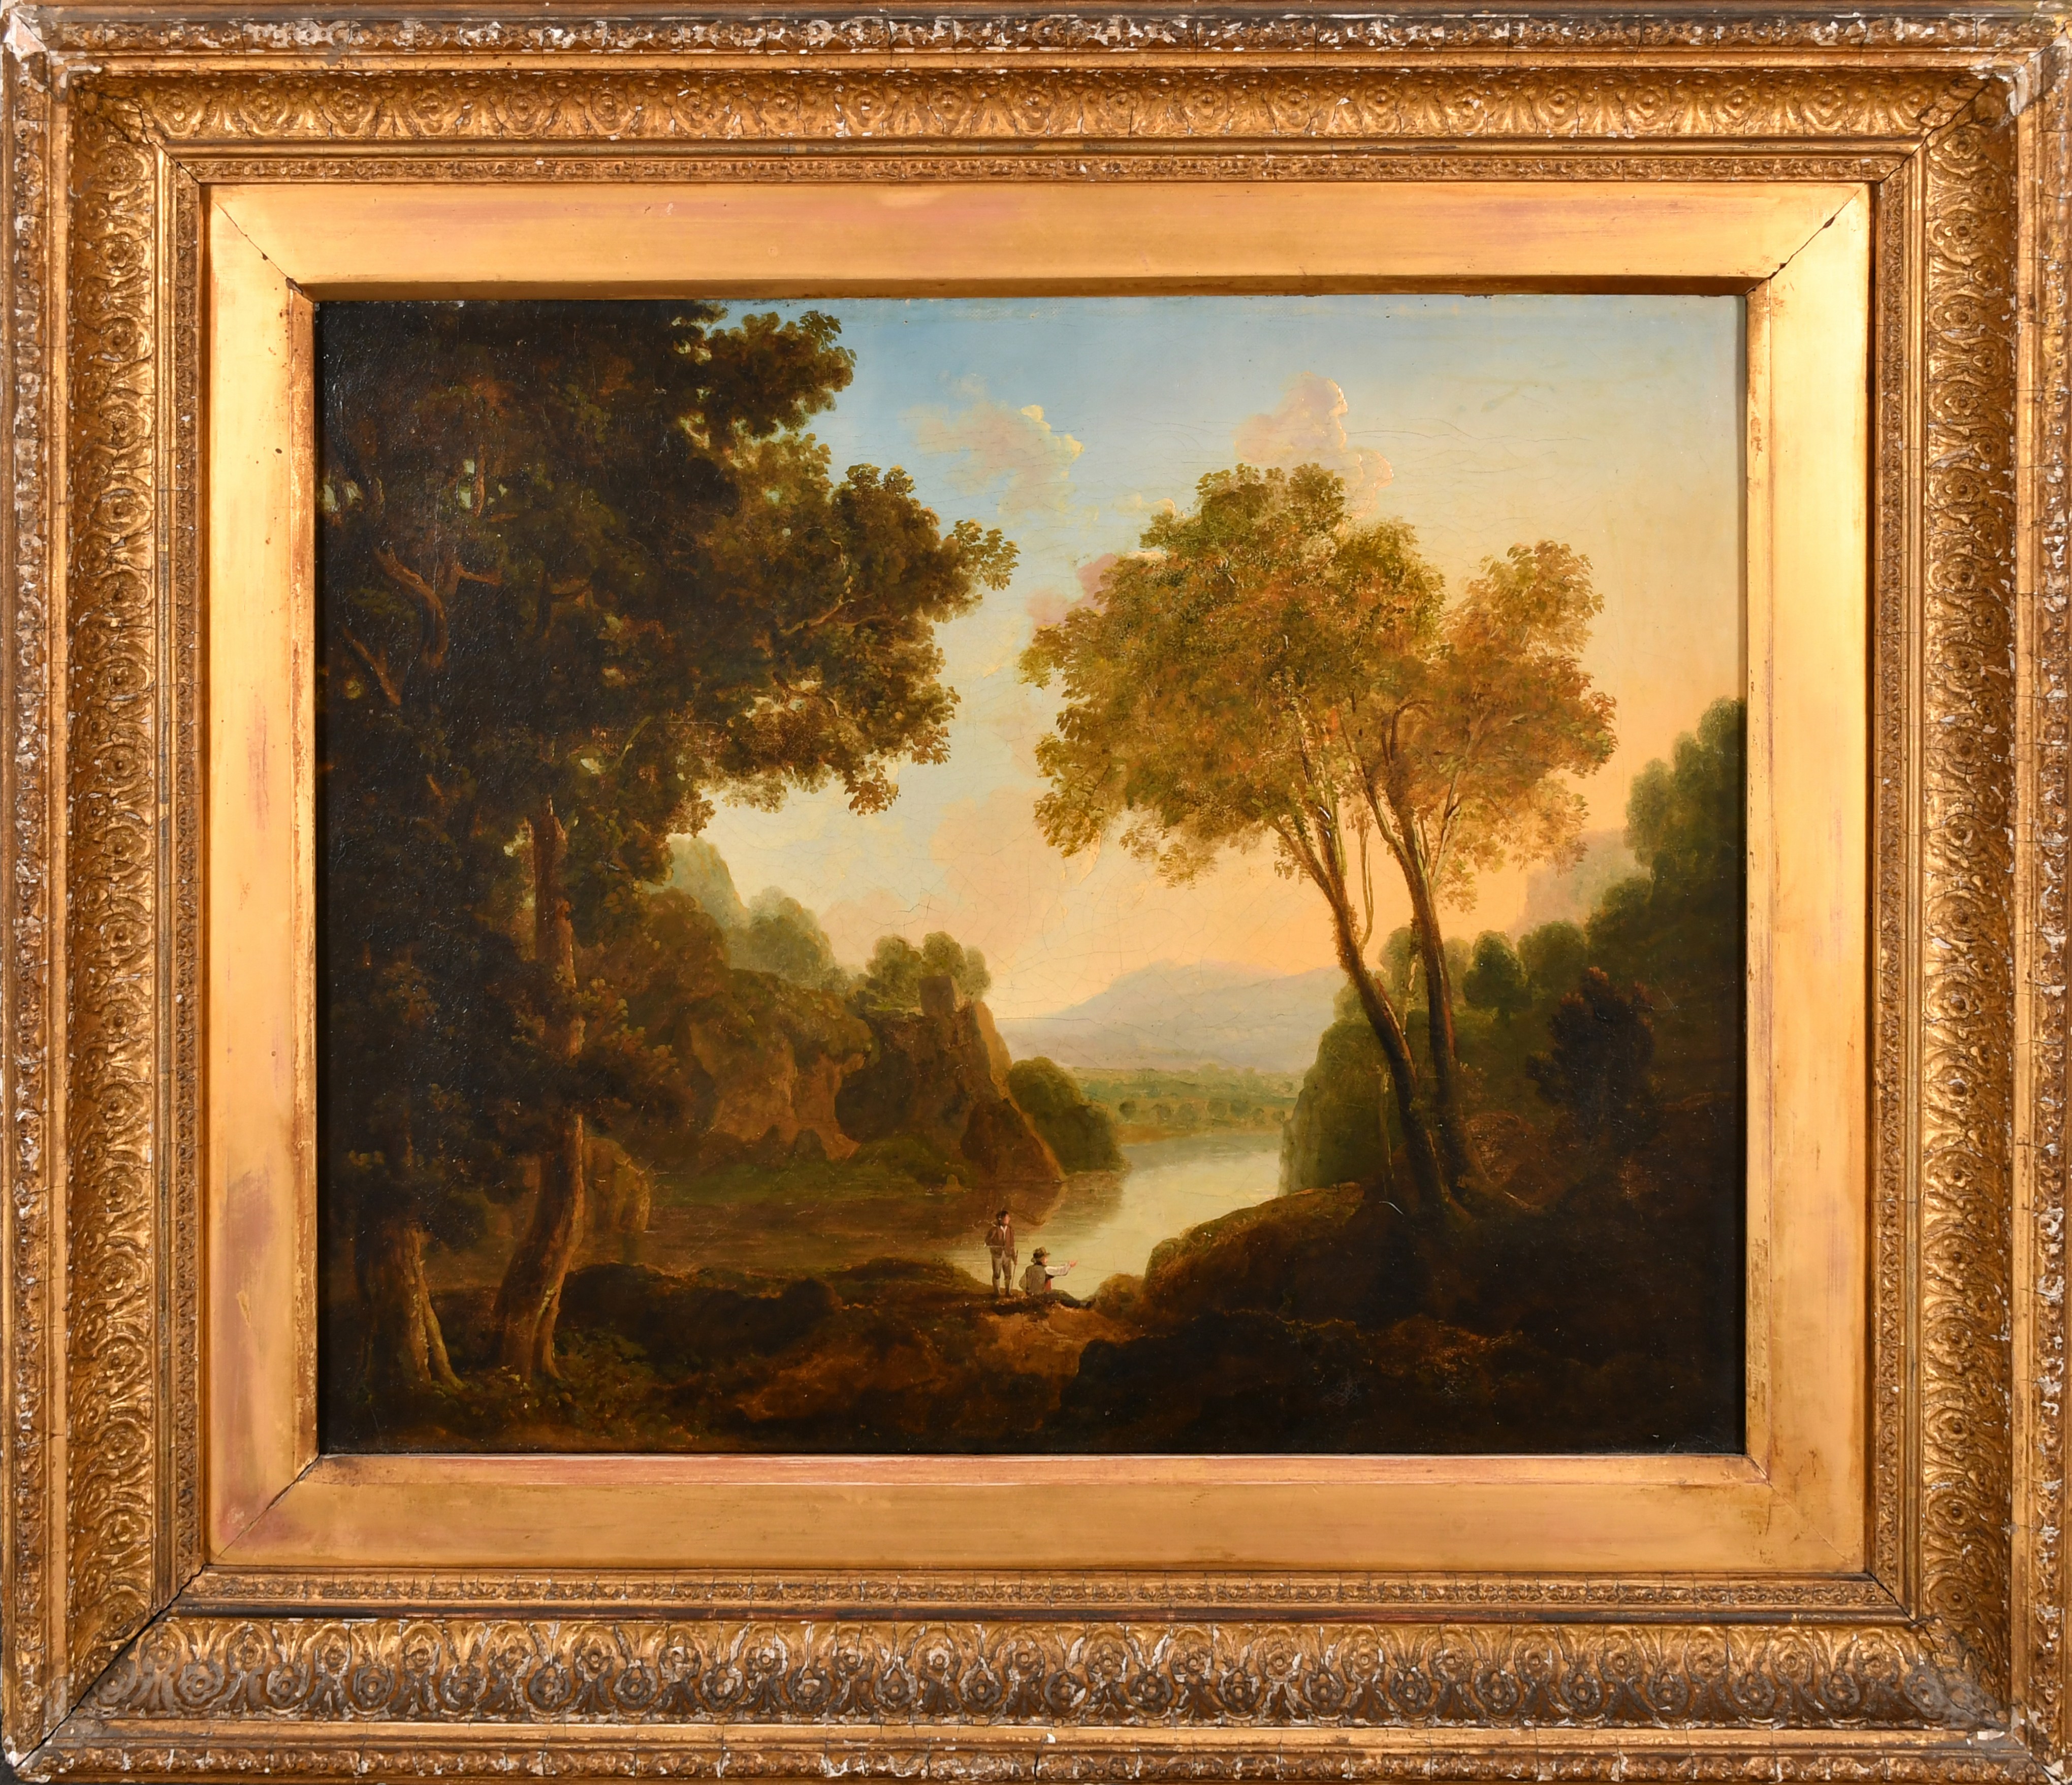 Early 19th Century English School. Figures Fishing in a River Landscape, Oil on canvas, 14" x 17.25" - Image 2 of 4